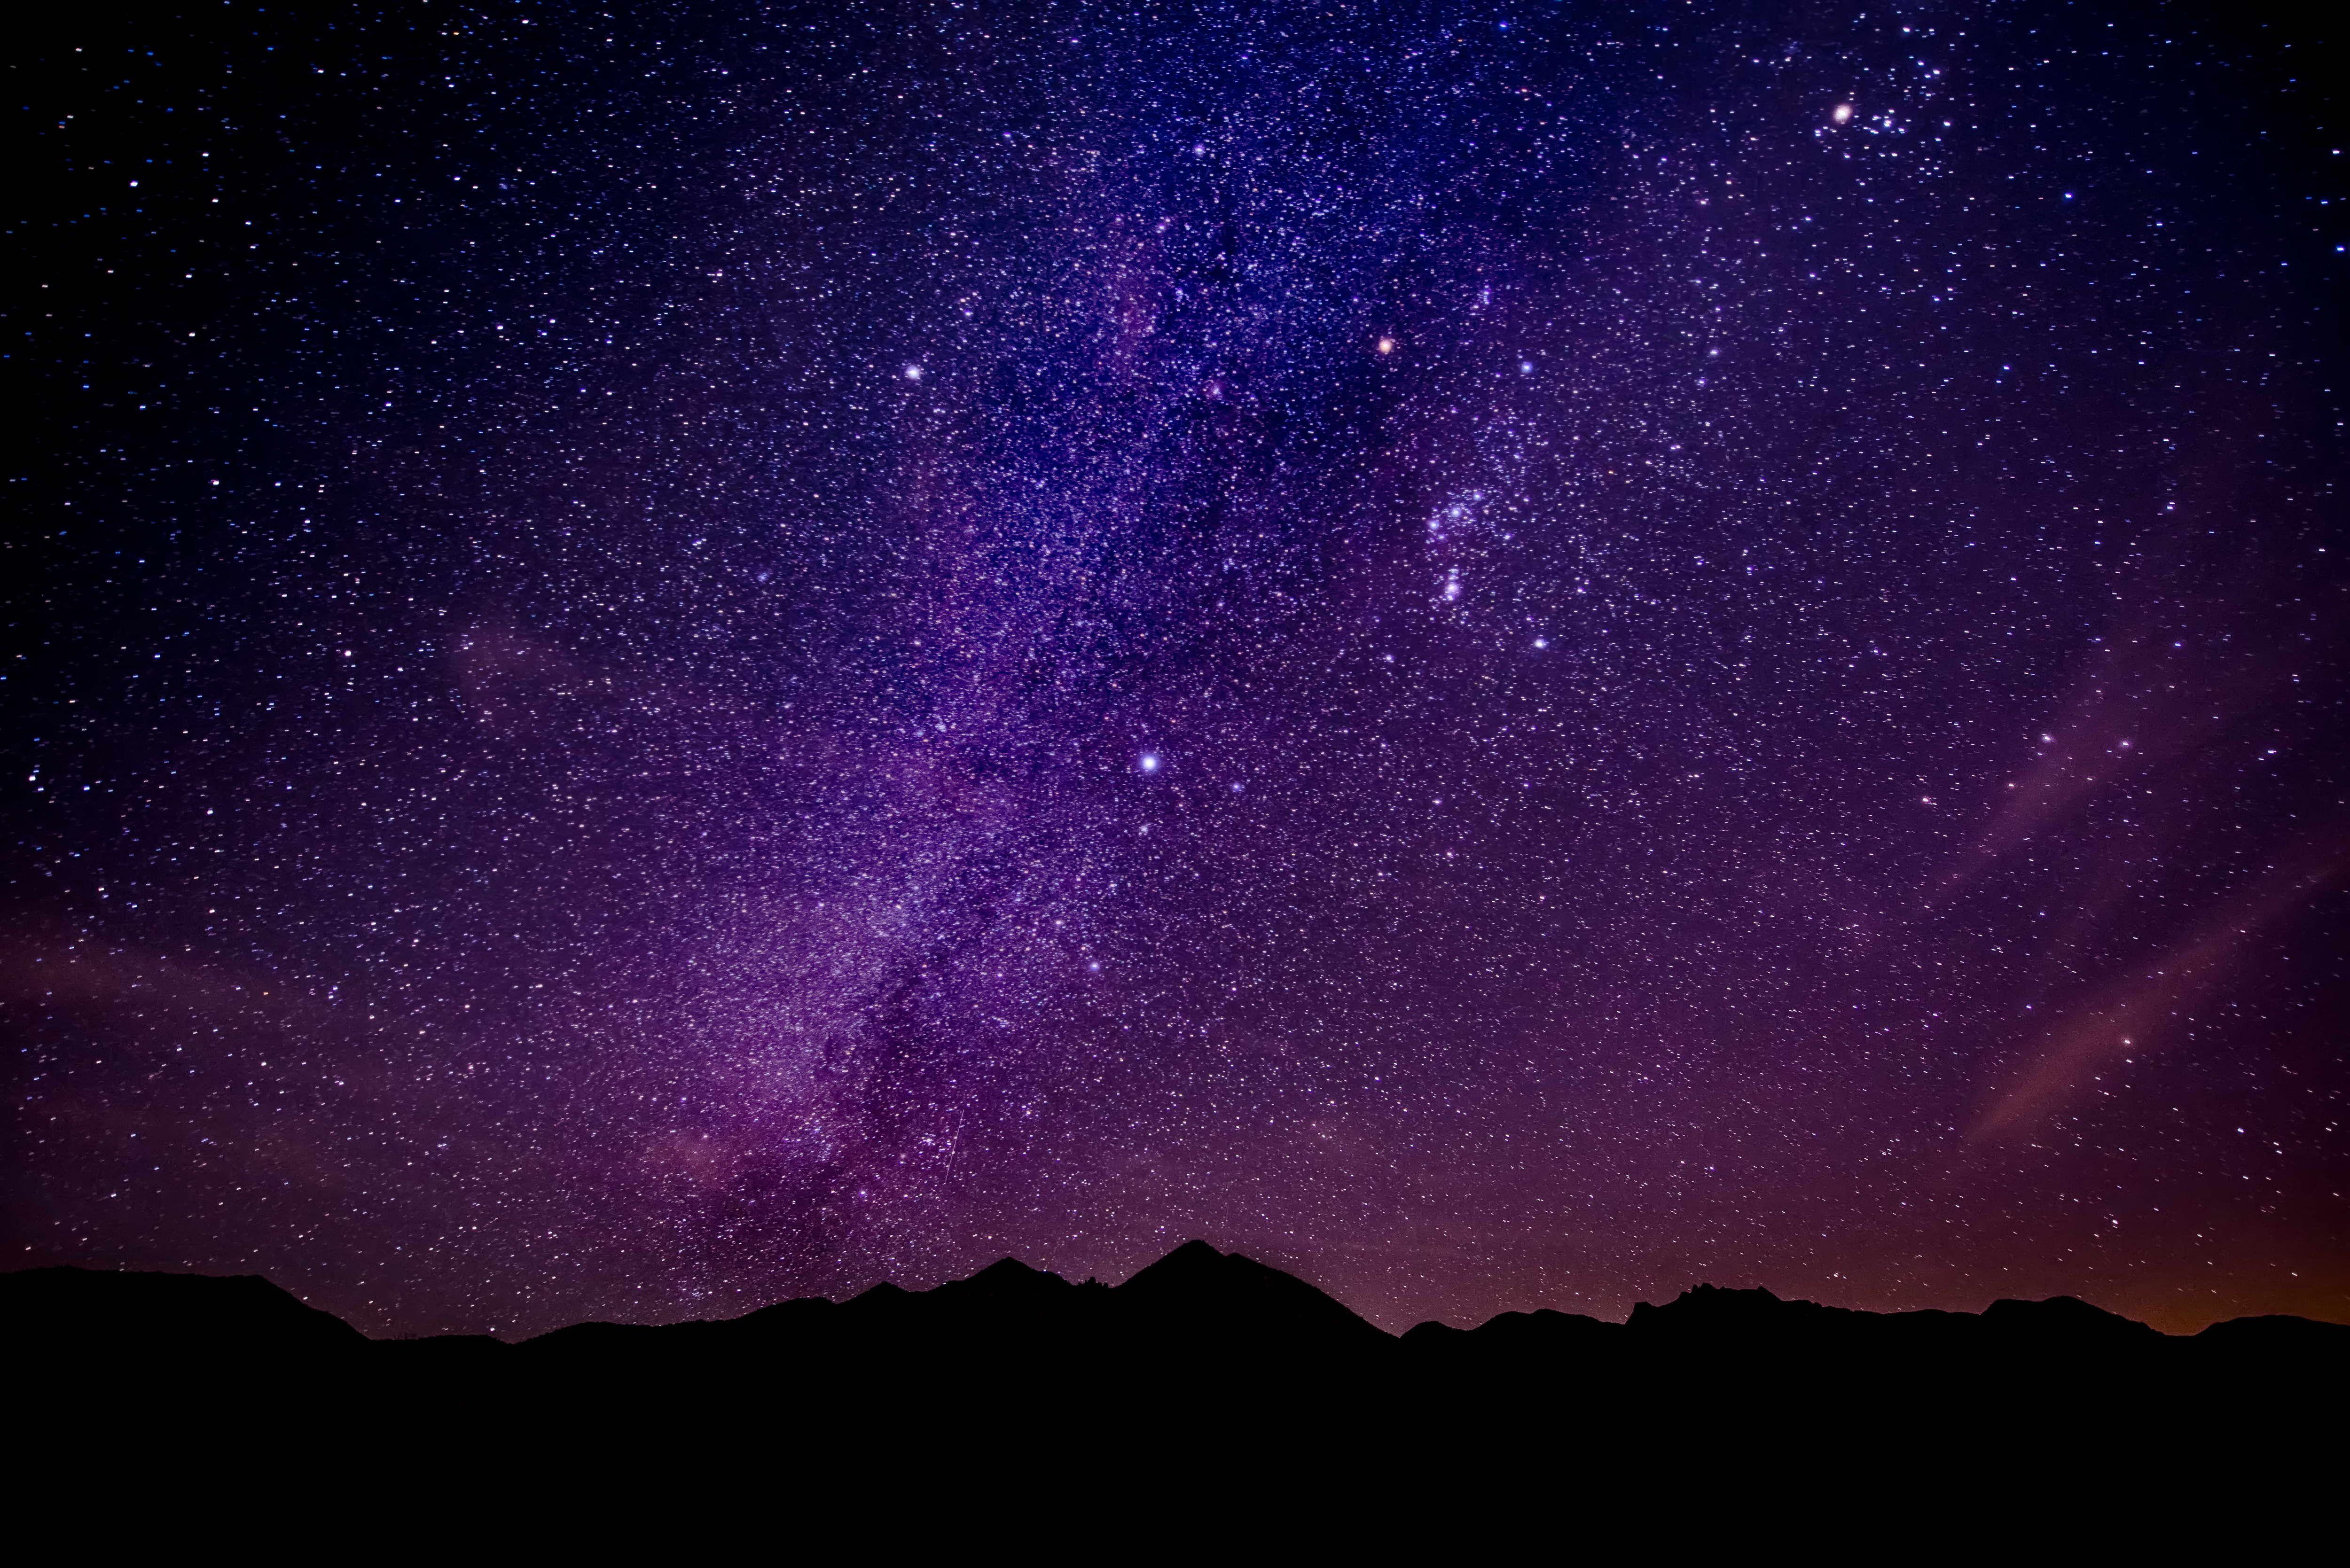 Night Stars Wallpapers Top Free Night Stars Backgrounds Wallpaperaccess